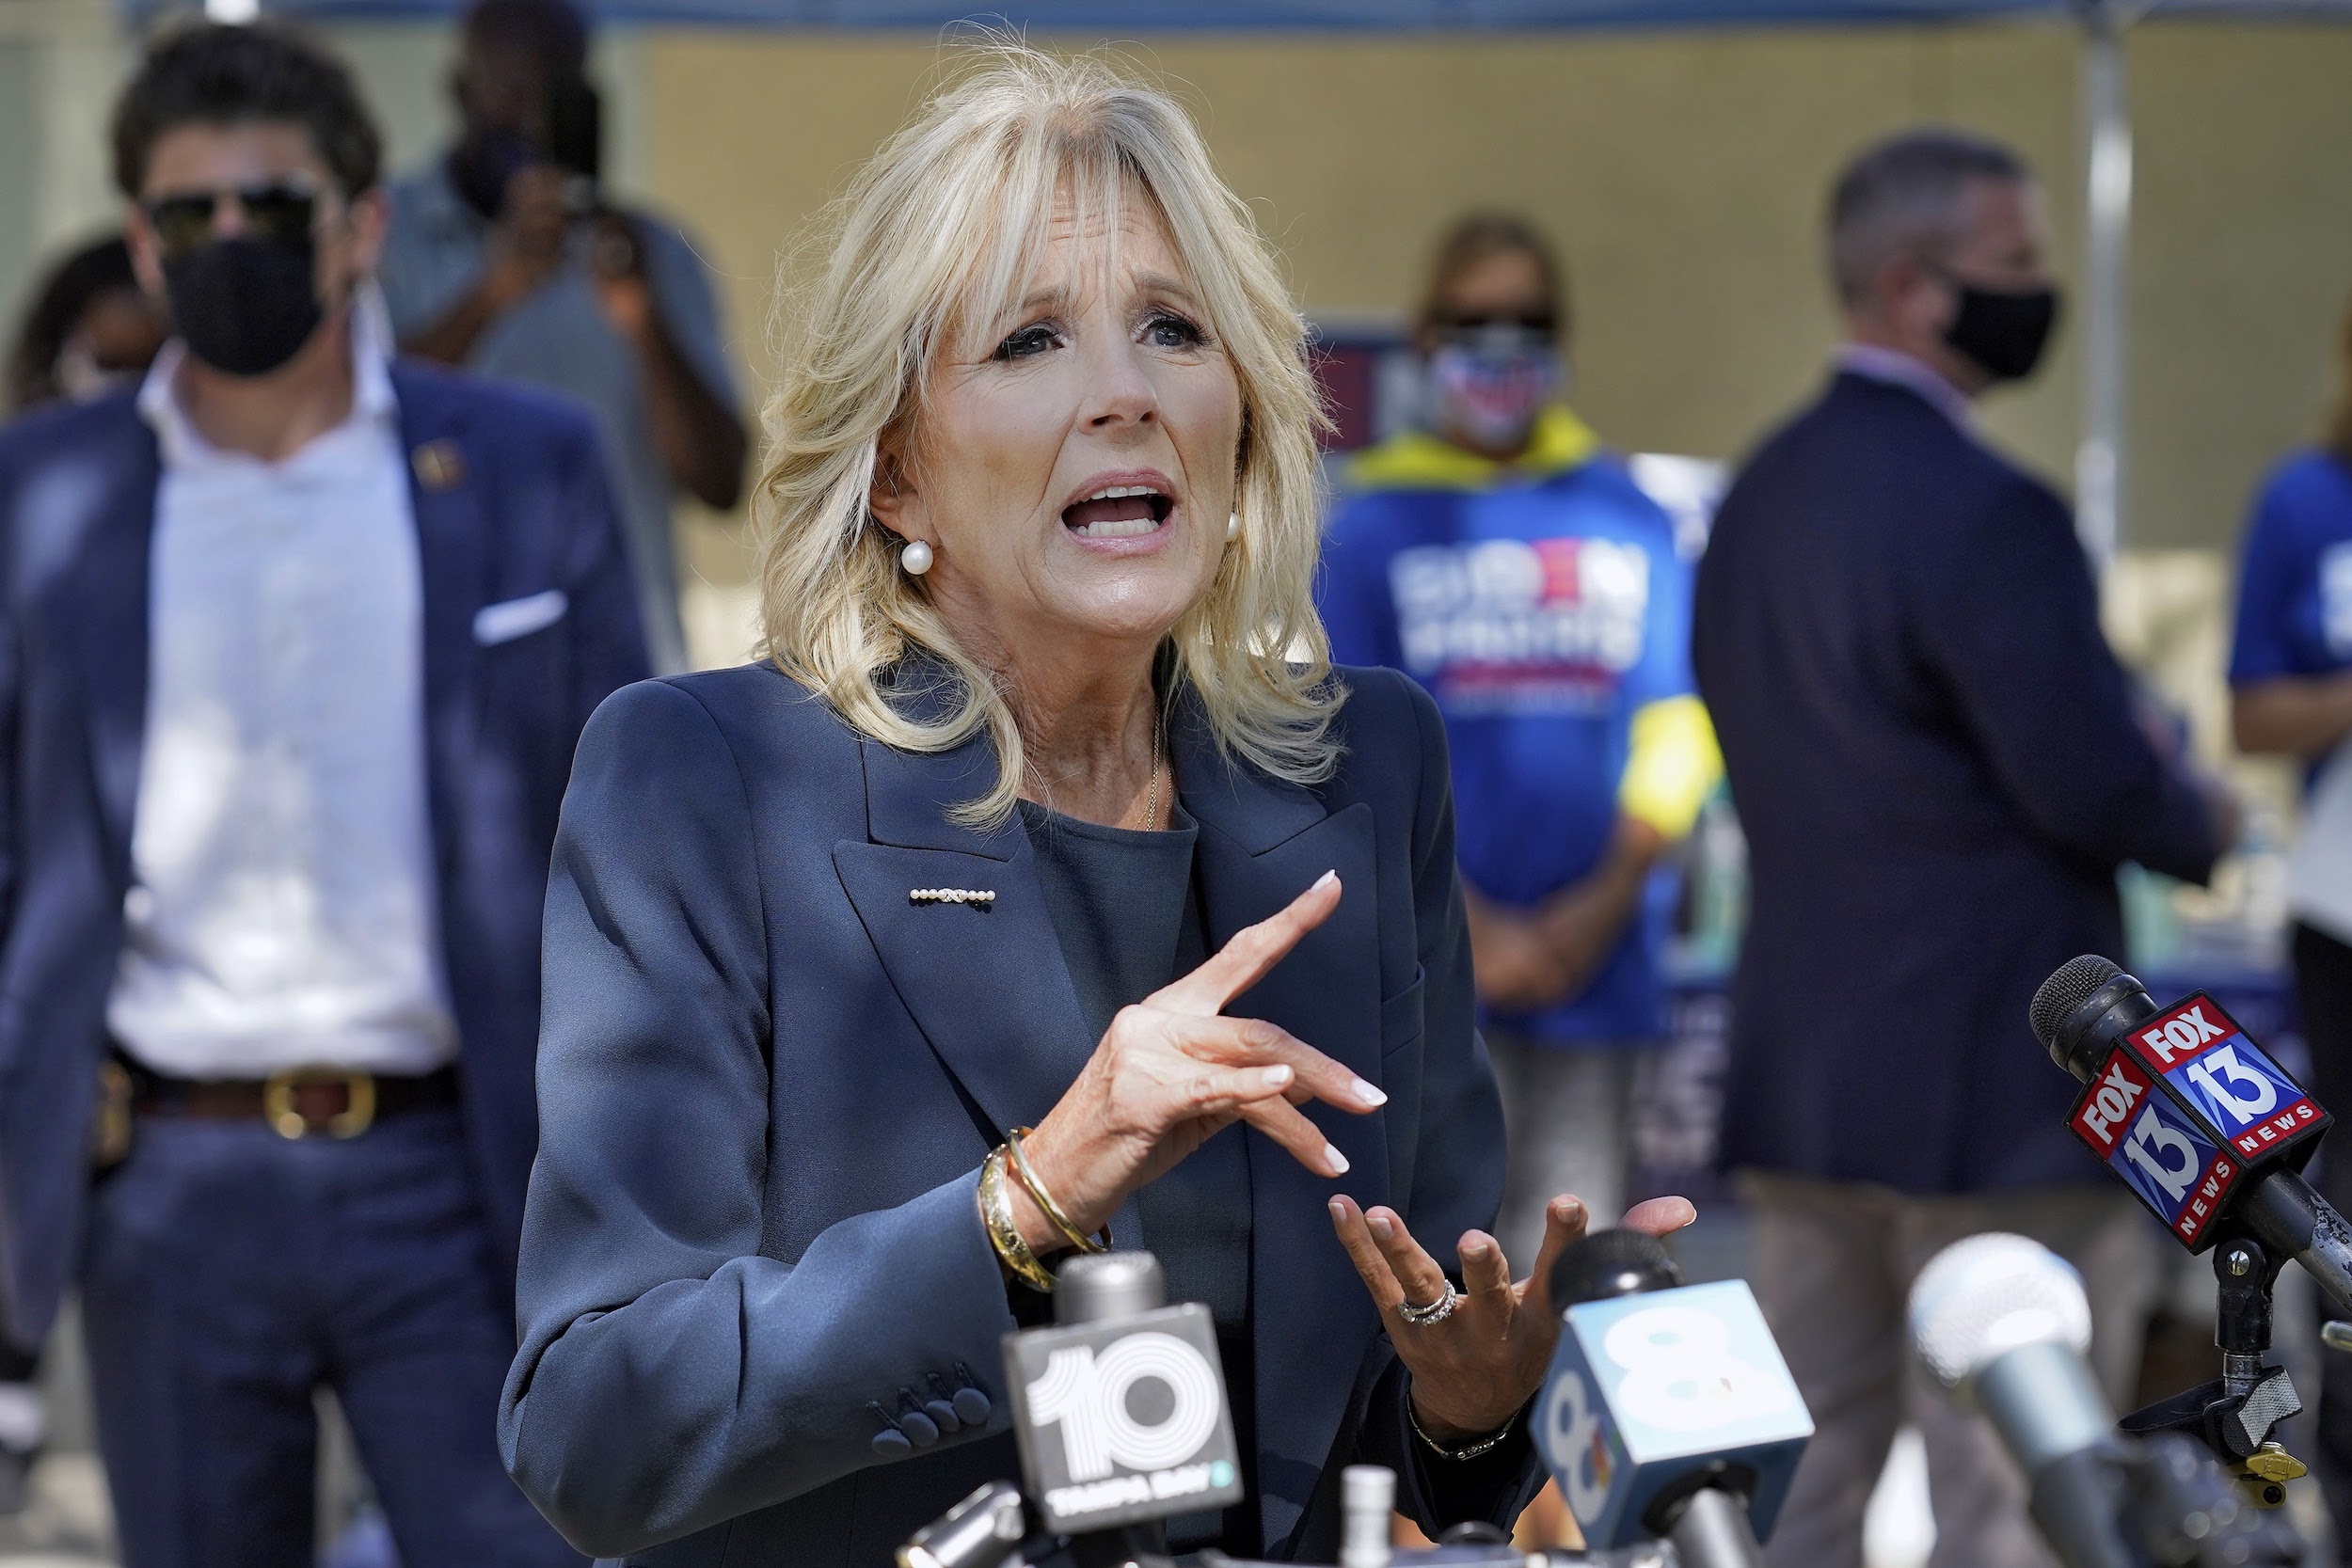 The Wall Journal's op-ed about Dr. Jill Biden — what they thinking? - Poynter